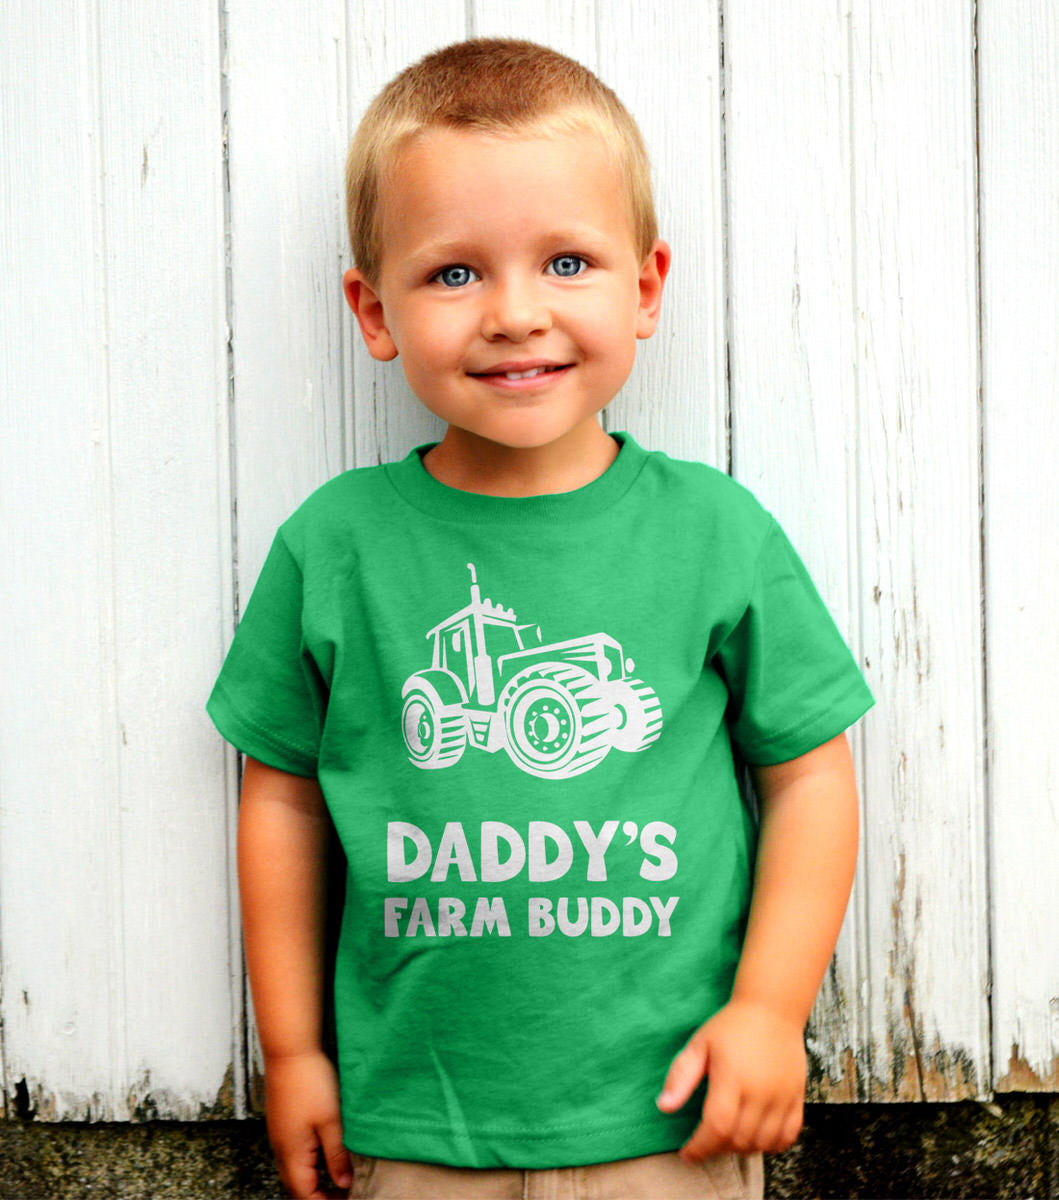 Daddy's Farm Buddy - Gift For Farmers Children Funny Youth Kids T-Shirt 